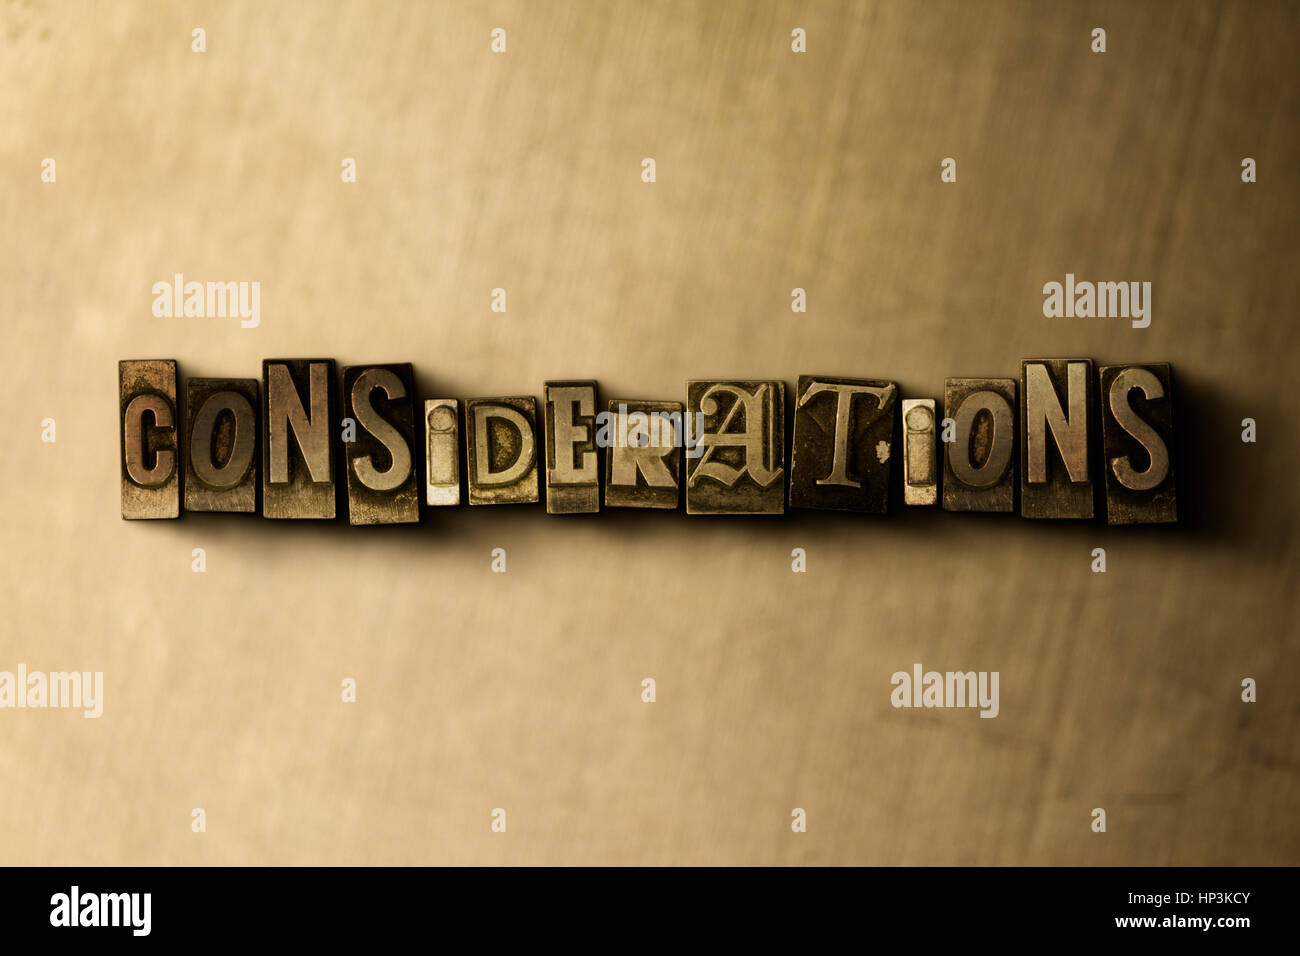 CONSIDERATIONS - close-up of grungy vintage typeset word on metal backdrop. Royalty free stock illustration.  Can be used for online banner ads and di Stock Photo